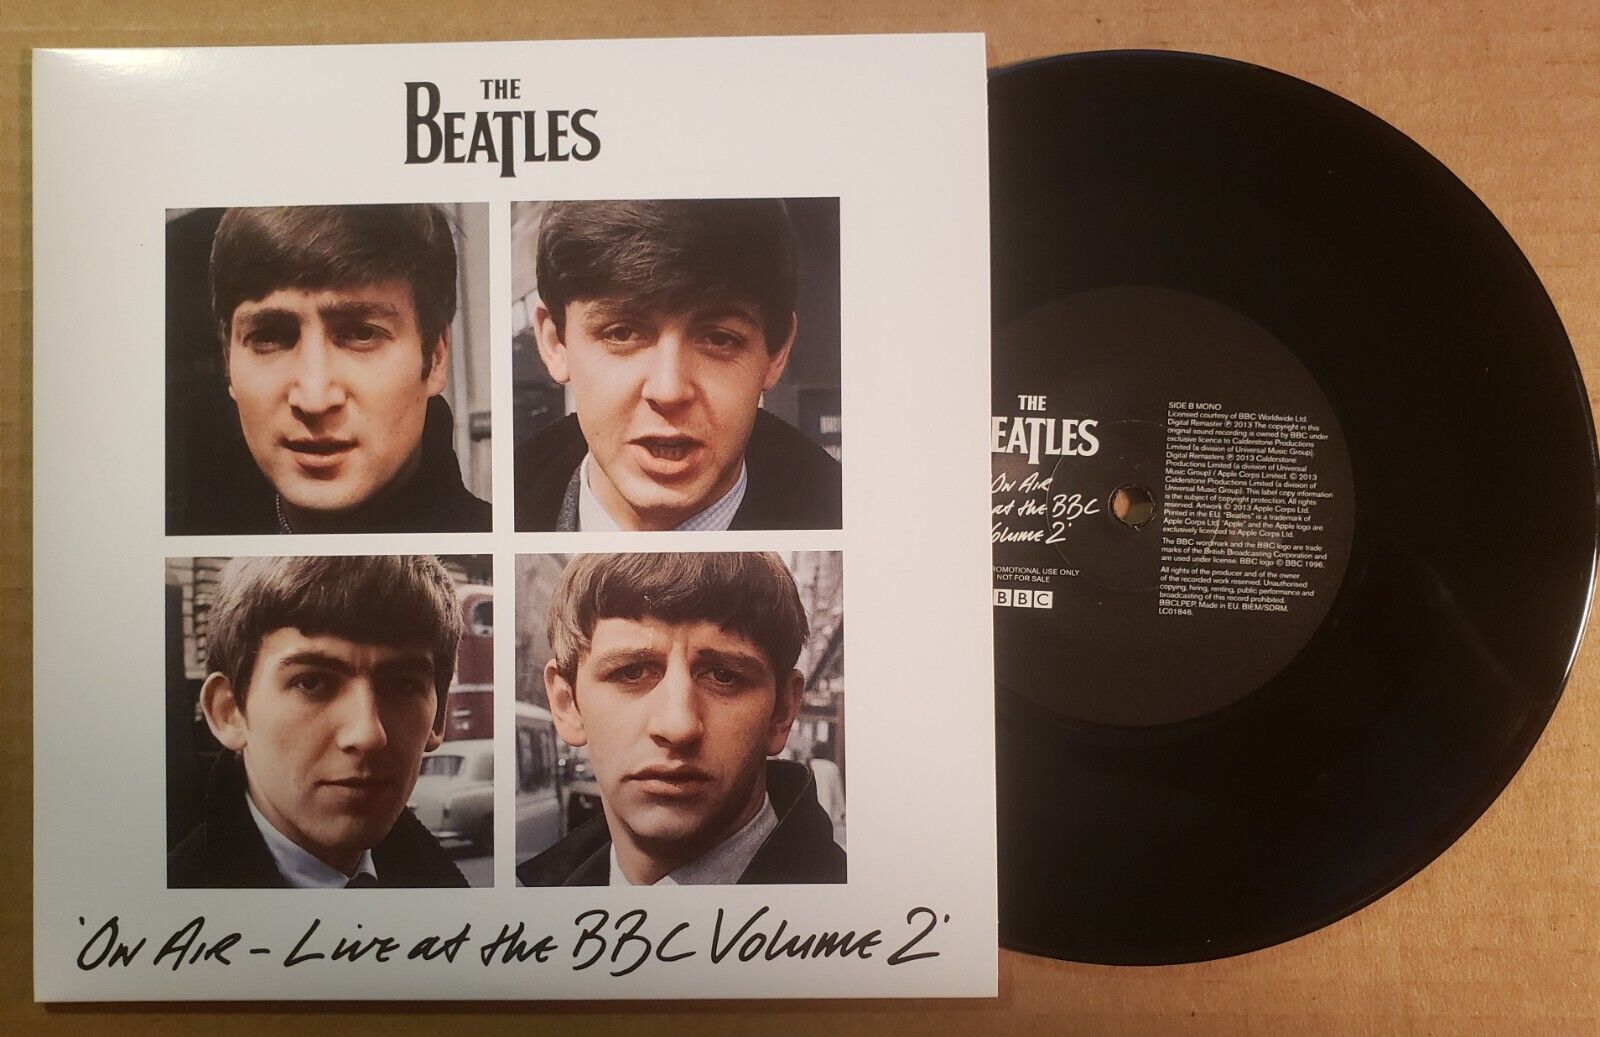 The Beatles 'On Air Live At The BBC Volume 2" 5 Track Promo 7 inch Vinyl Scarce